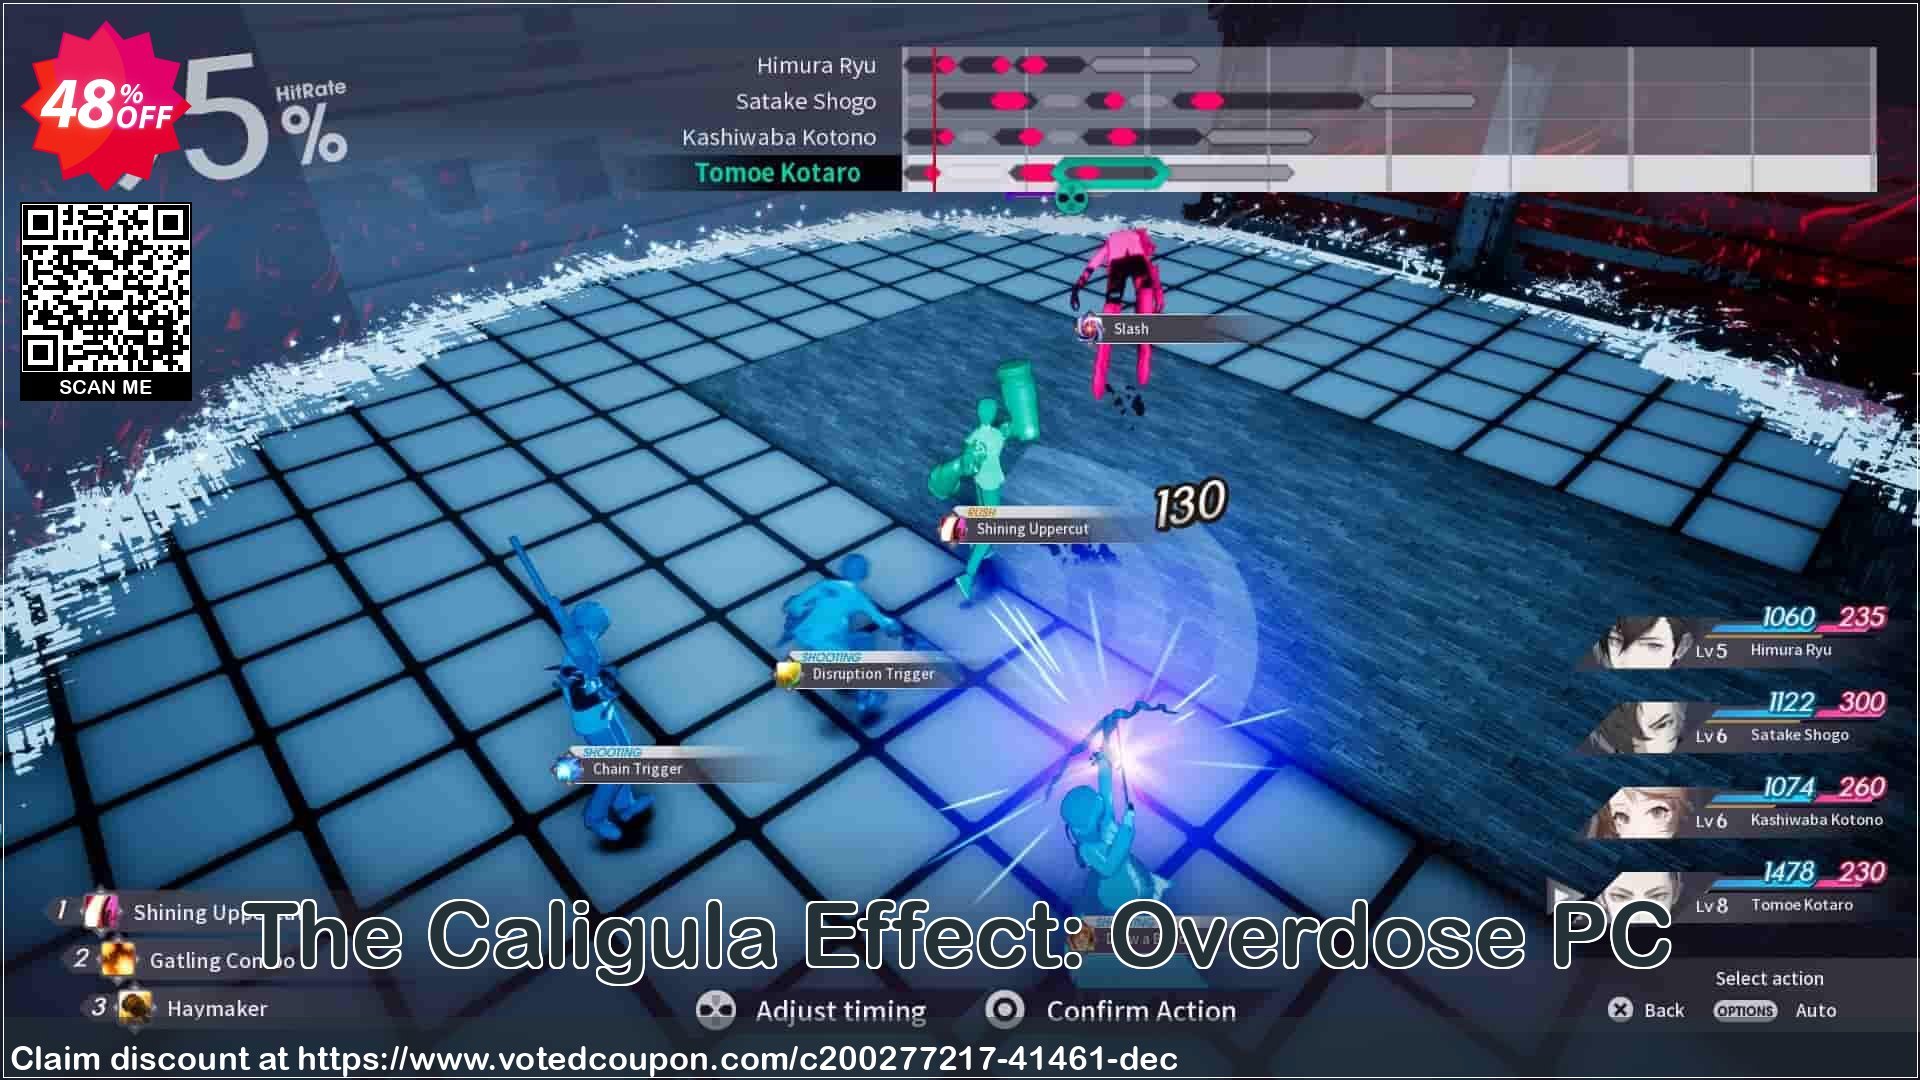 The Caligula Effect: Overdose PC Coupon Code May 2024, 48% OFF - VotedCoupon